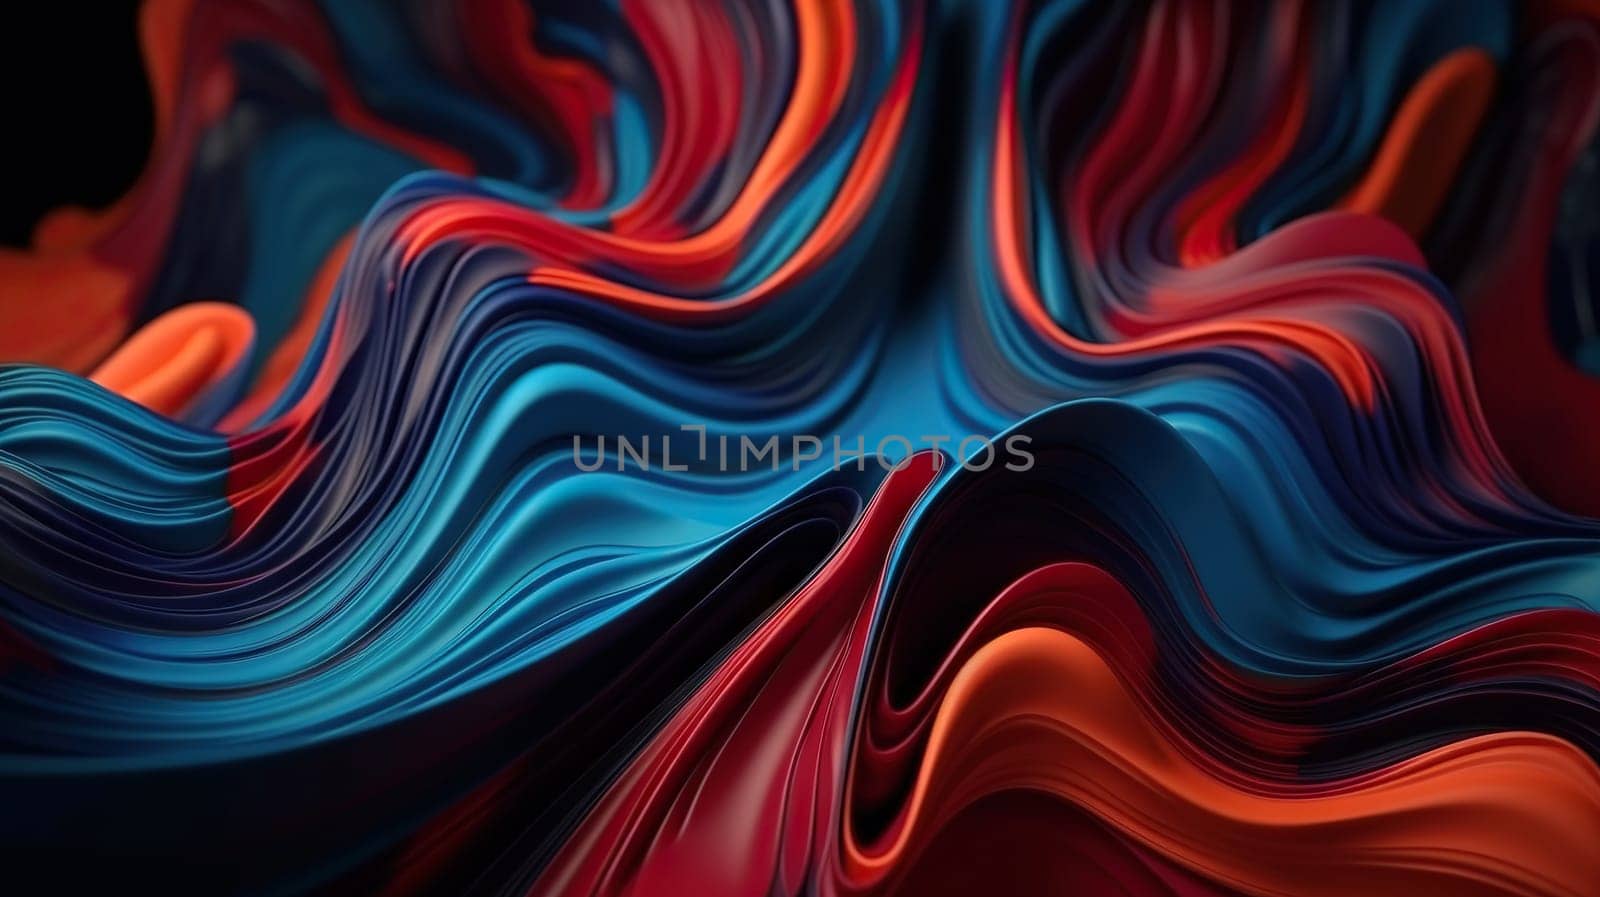 A dynamic swirl of blue and red waves - abstract background by chrisroll